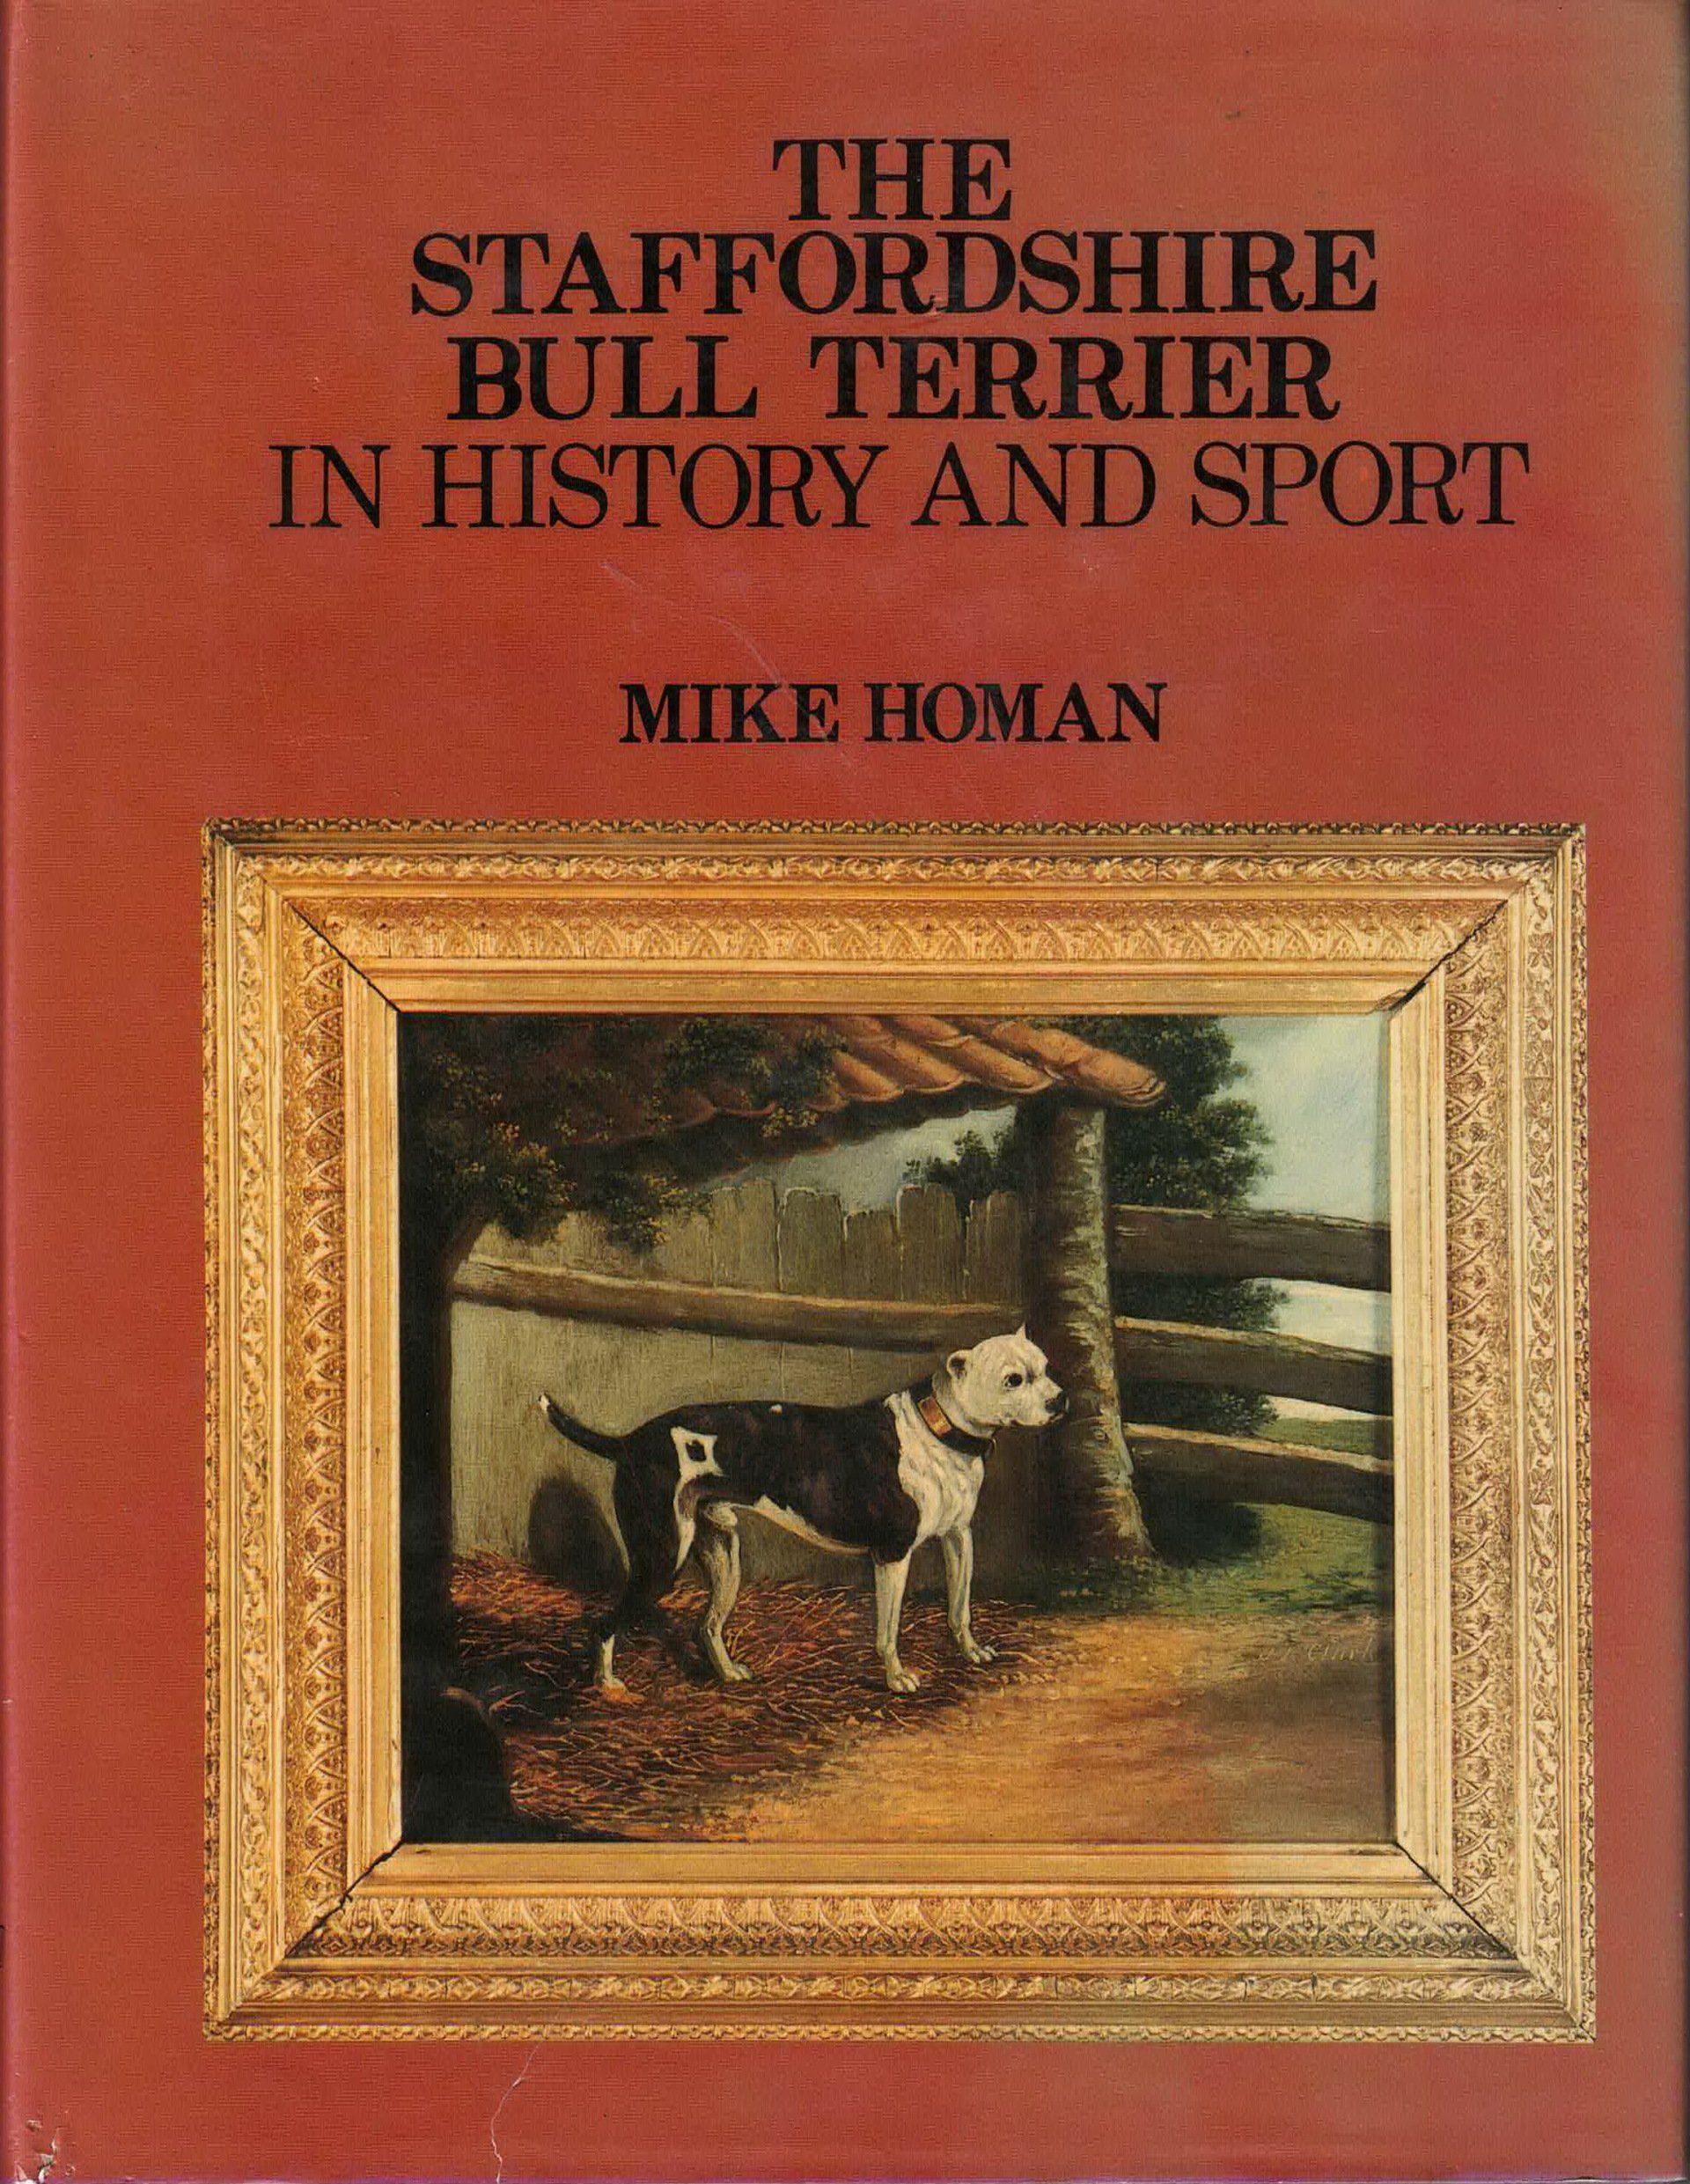 The Staffordshire Bull Terrier in History and Sport by Mike Homan